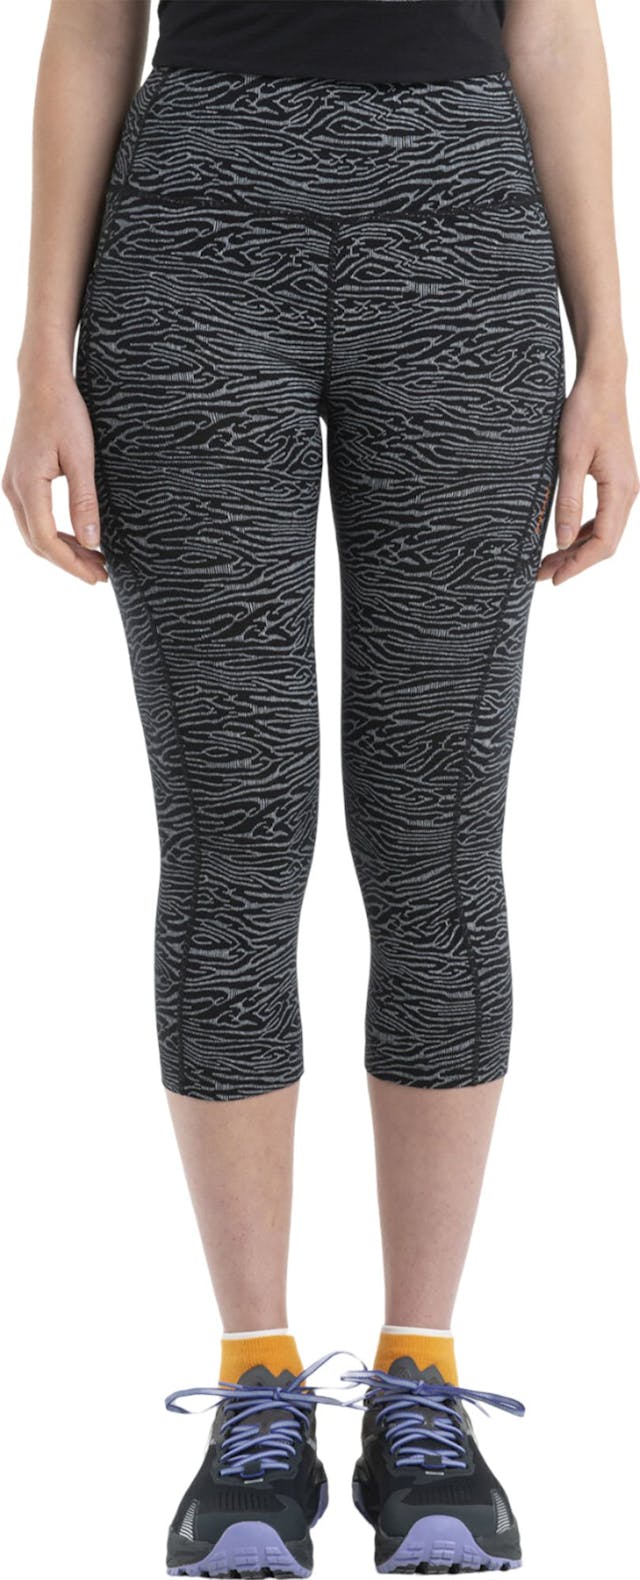 Product image for Merino Fastray High Rise 3/4 Tights Topo Lines - Women's